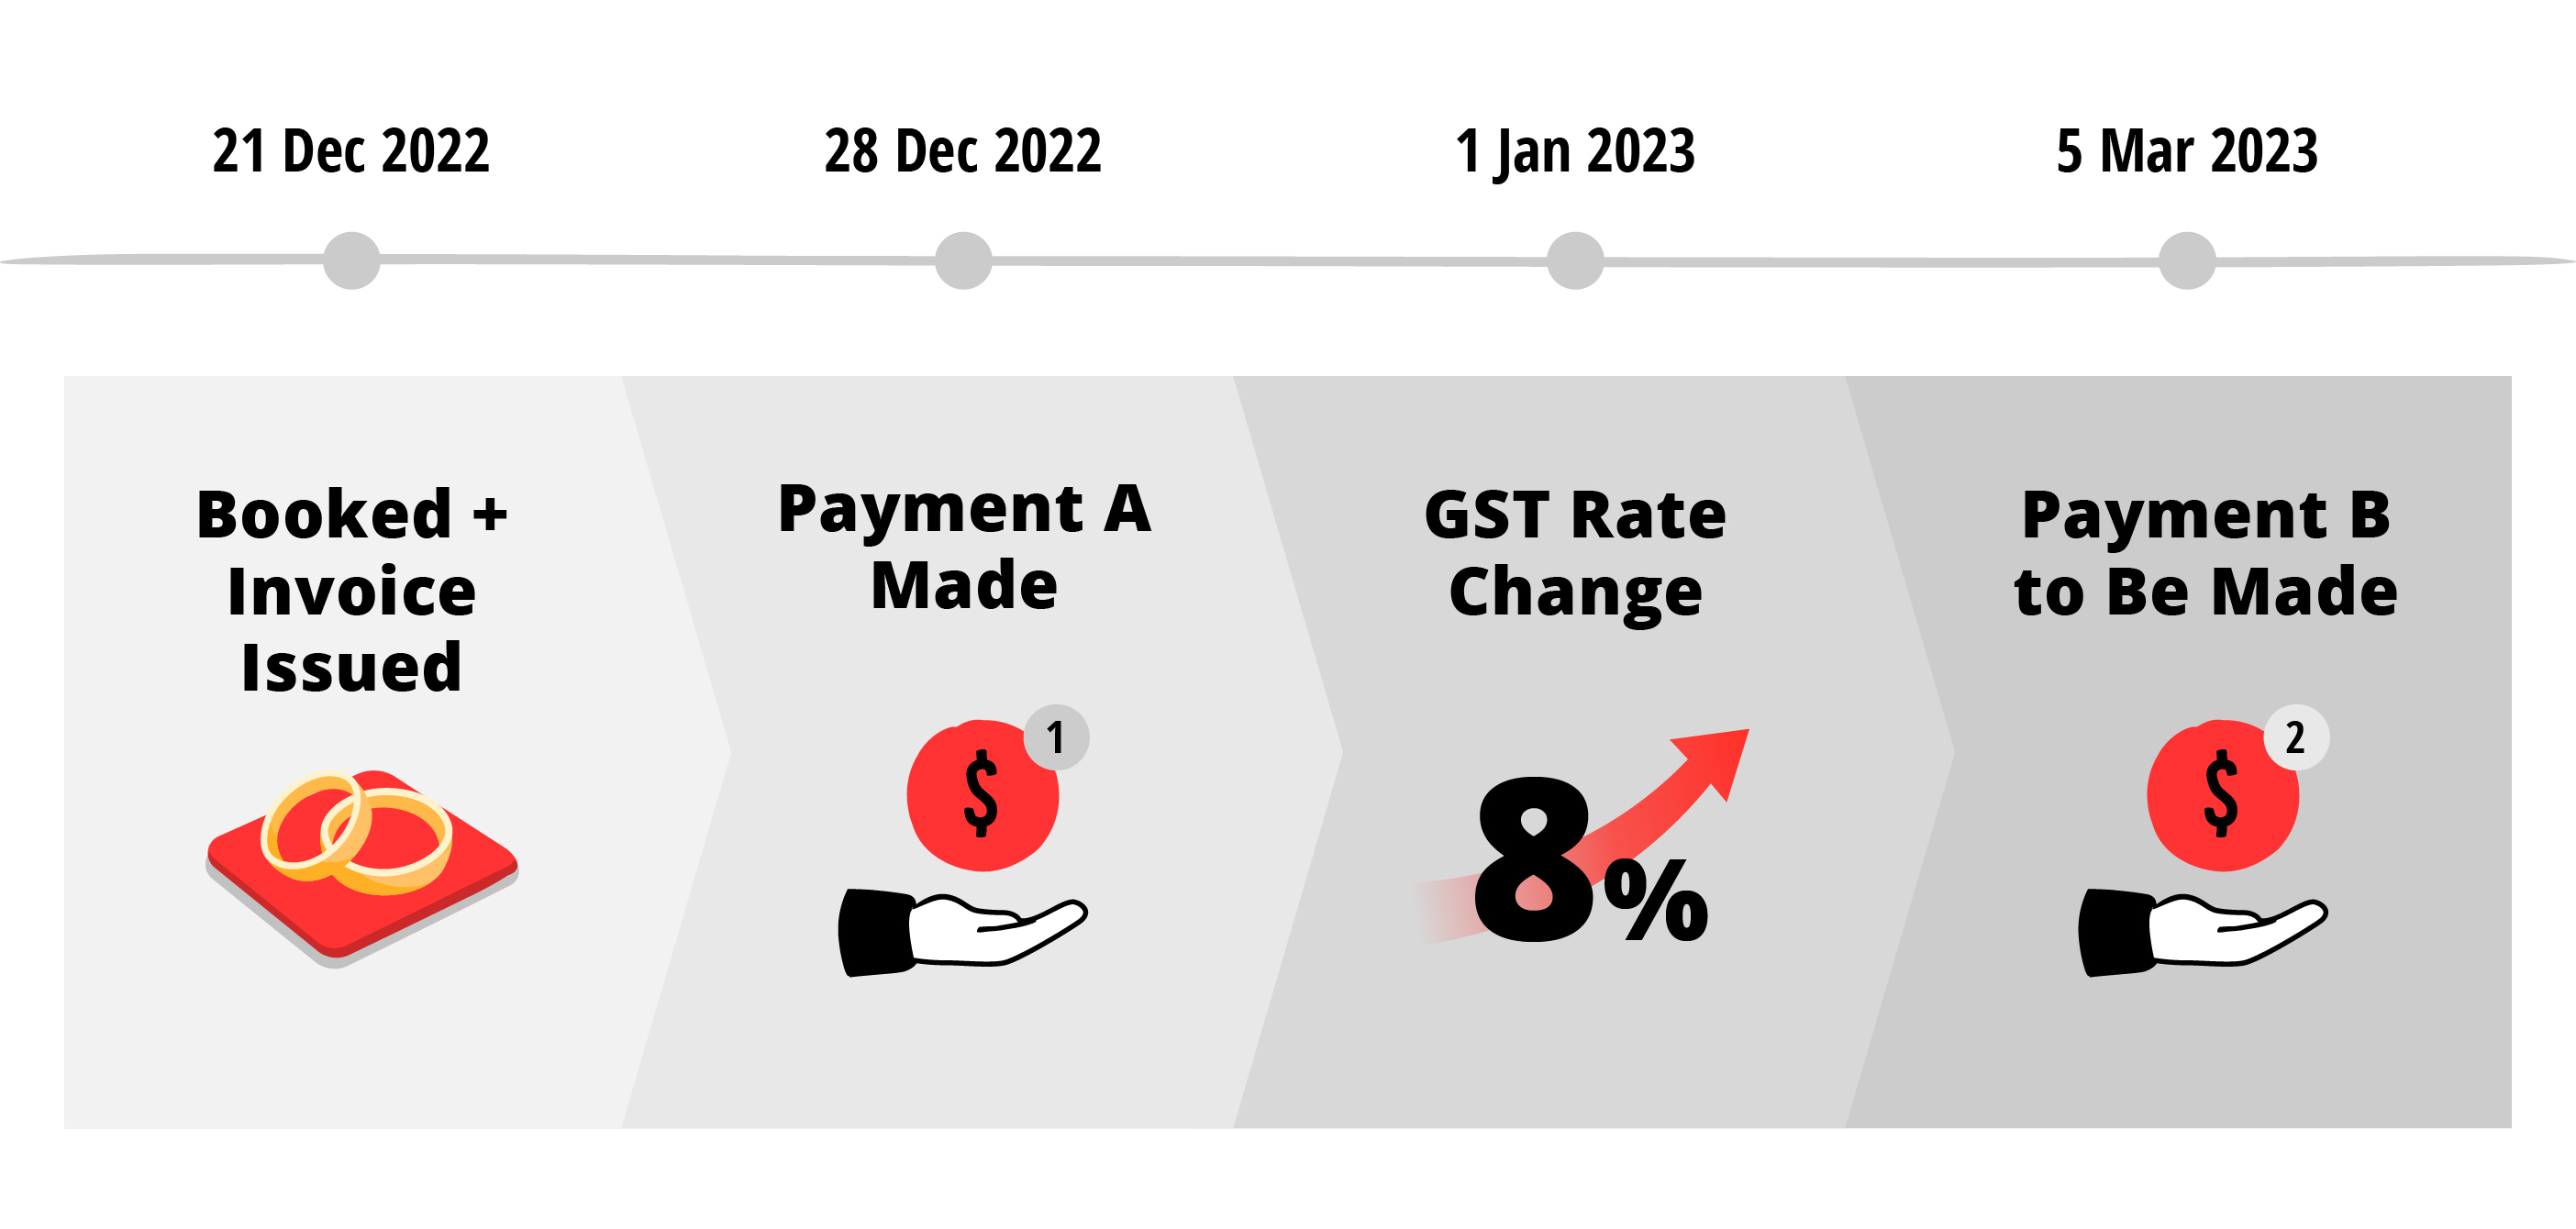 Preparing for GST rate changes 